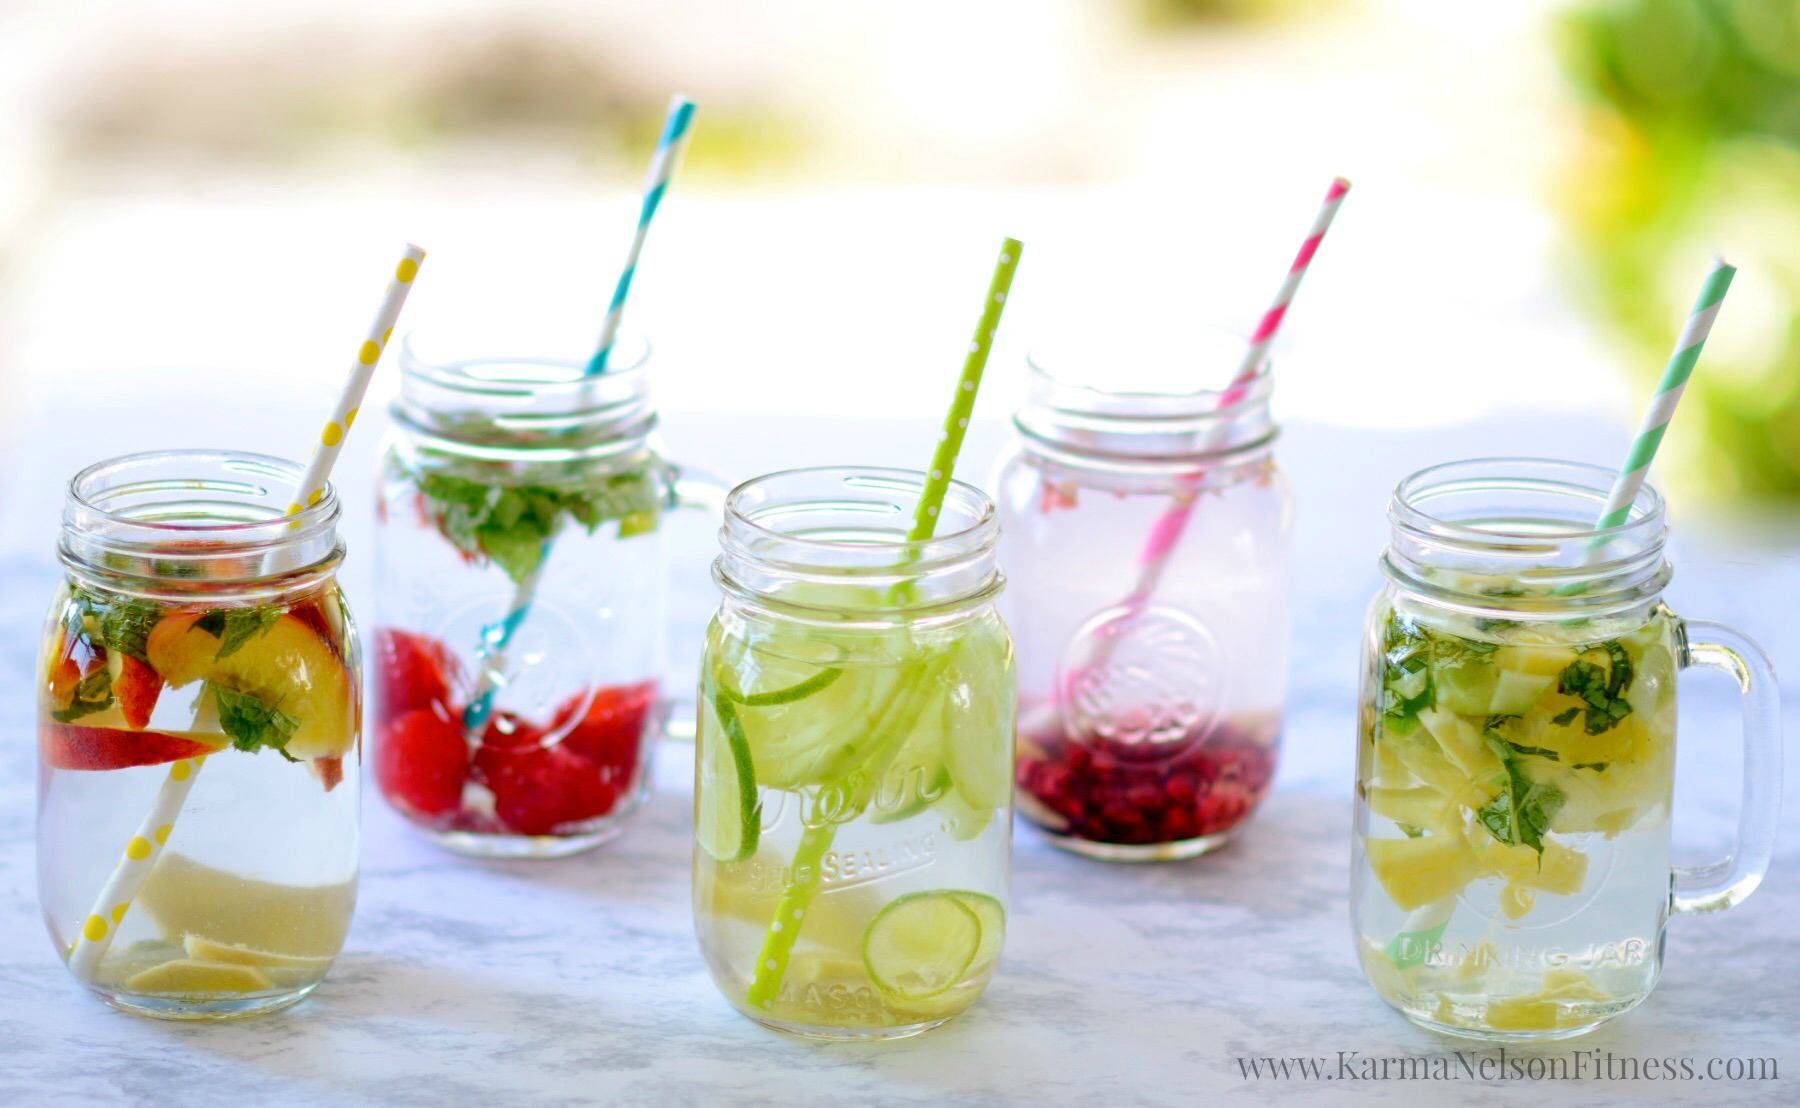 Mix Up Your Detox Drinking Water